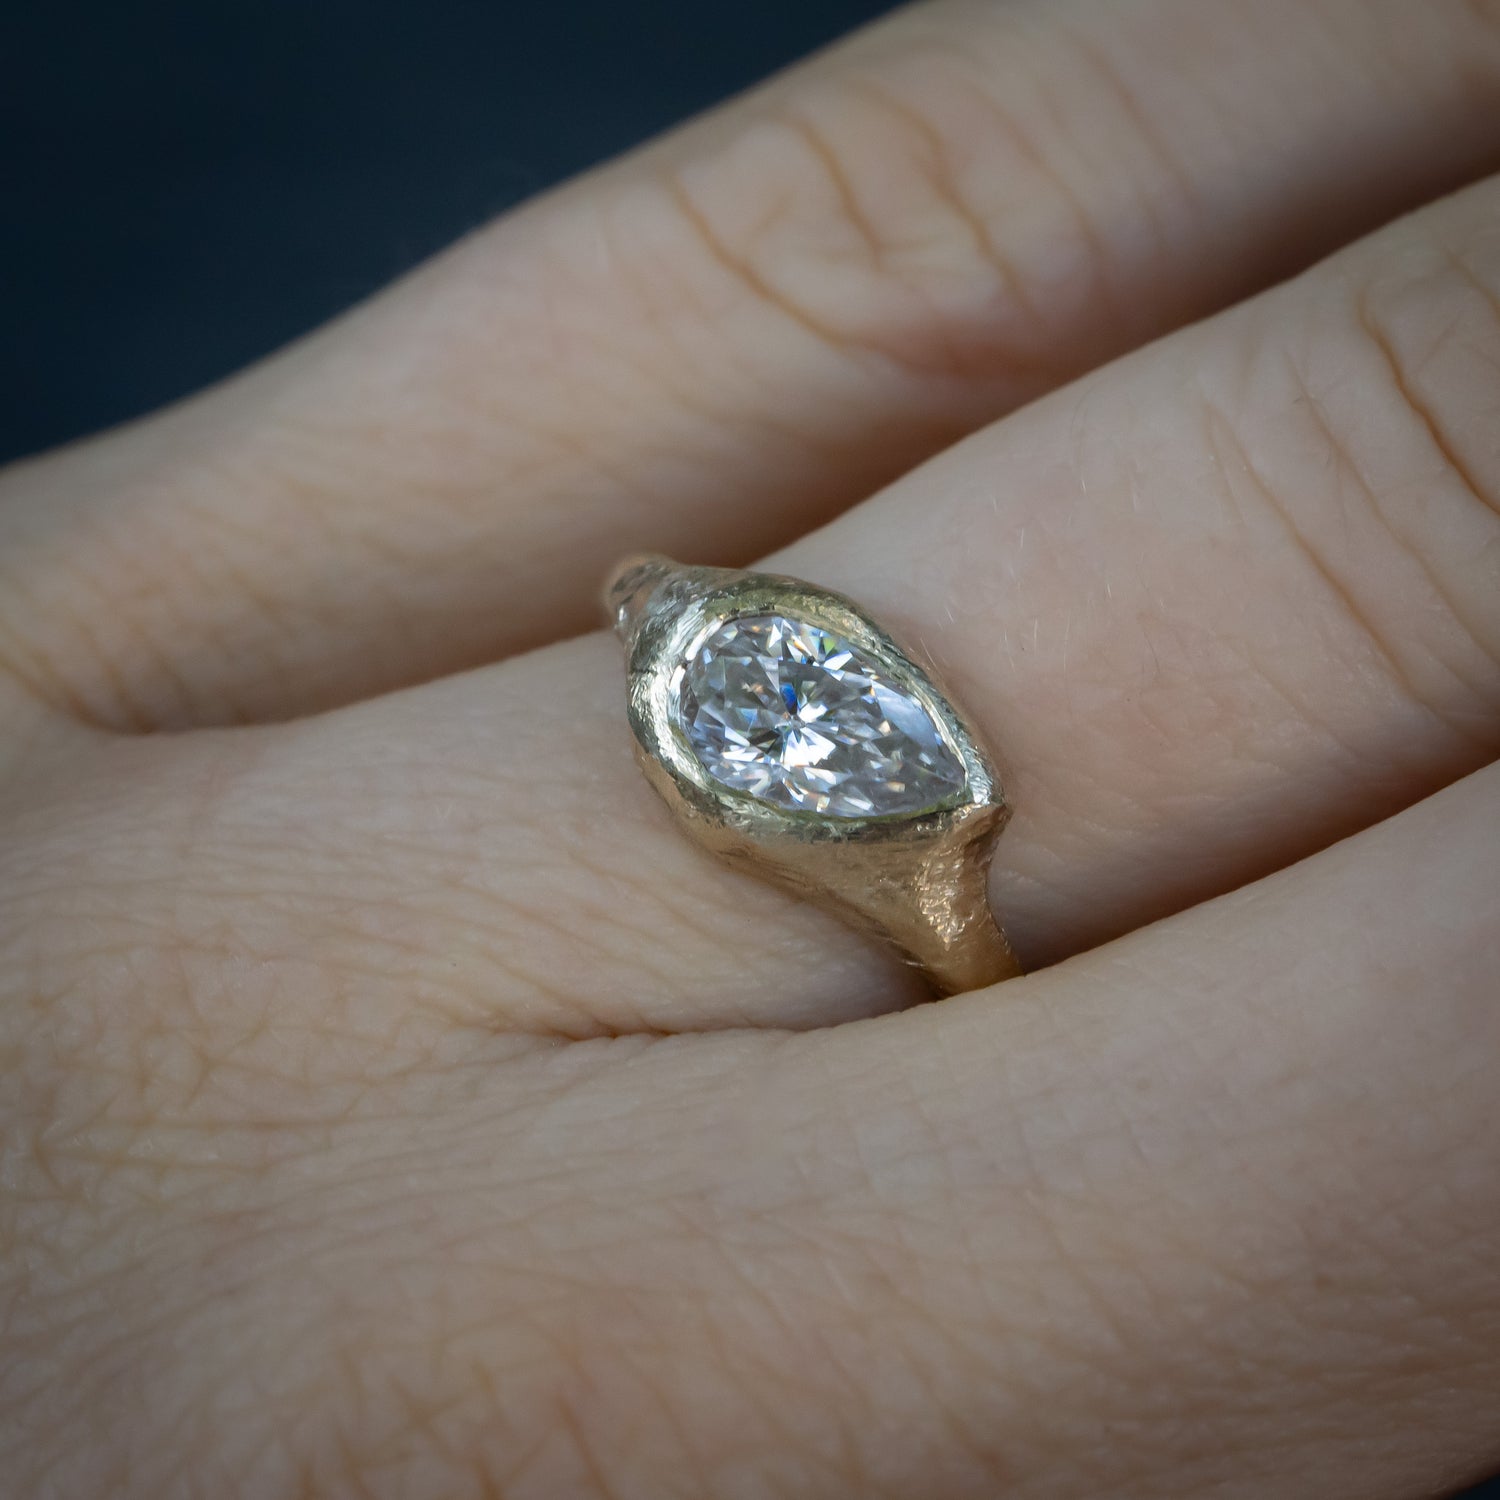 Slanted Pear, Signent Style Diamond Engagement Ring - Salt and Pepper Diamond Ring- mossNstone